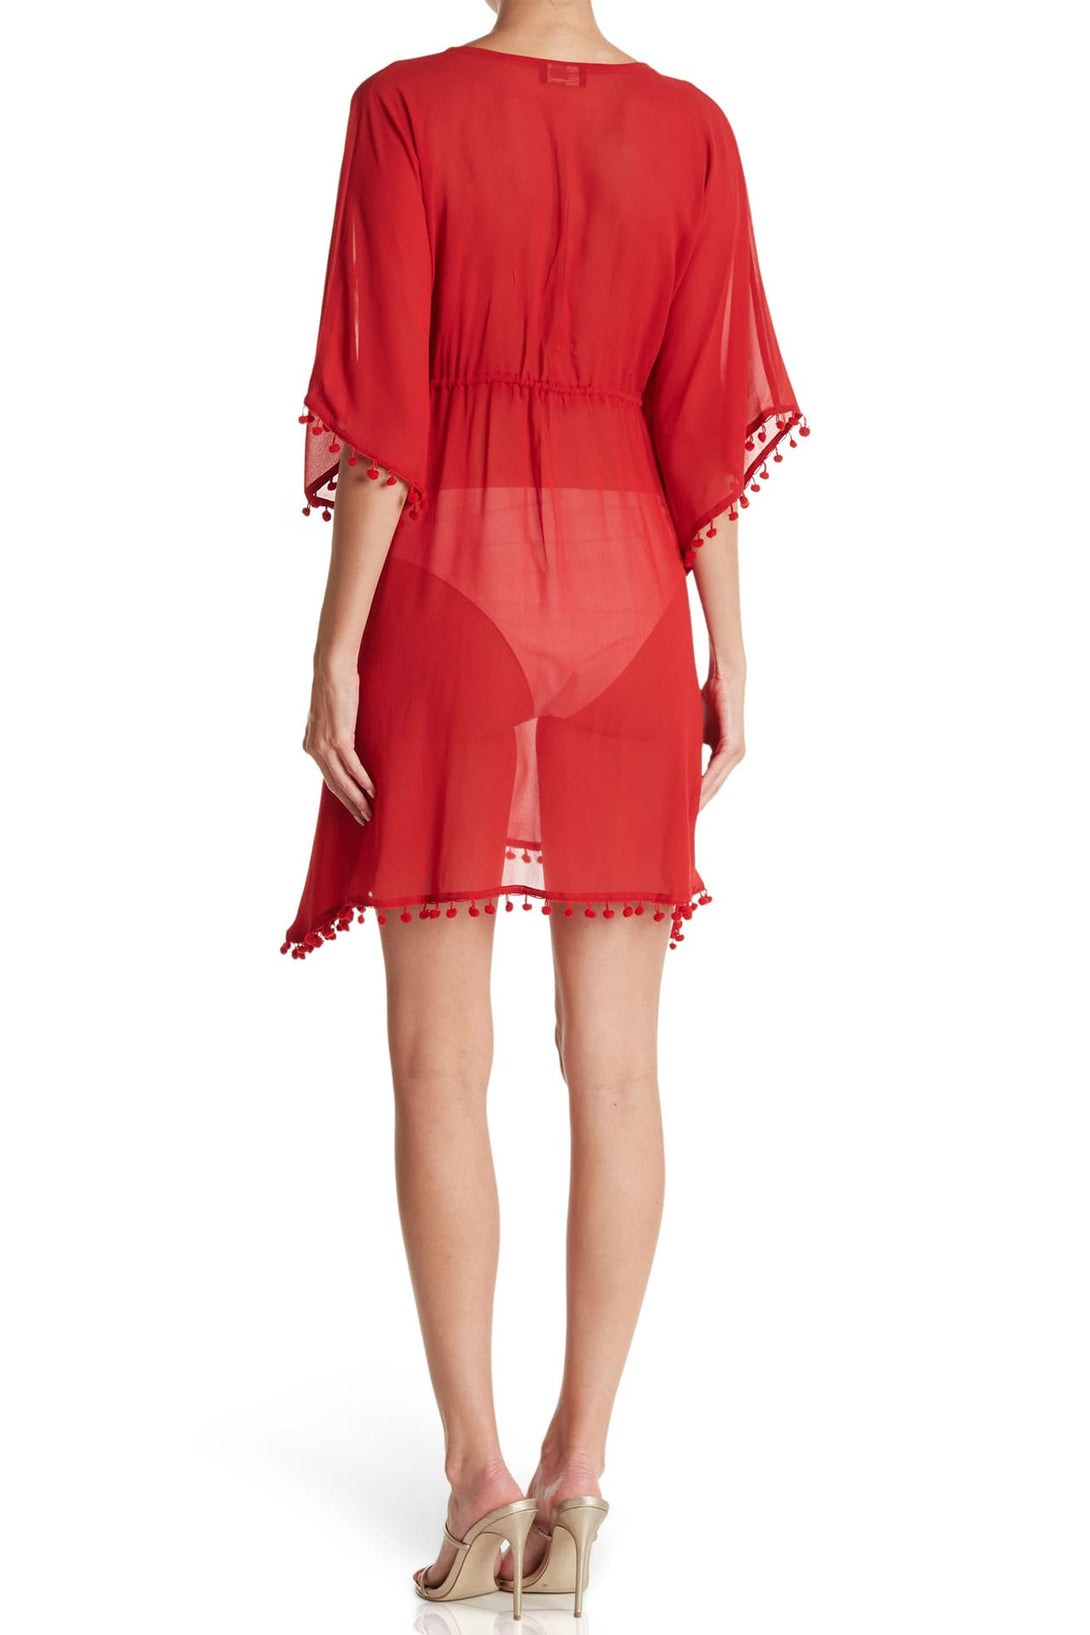 "red bathing suit cover up" "womens swimsuit coverup" "Shahida Parides" "sheer cover up top"